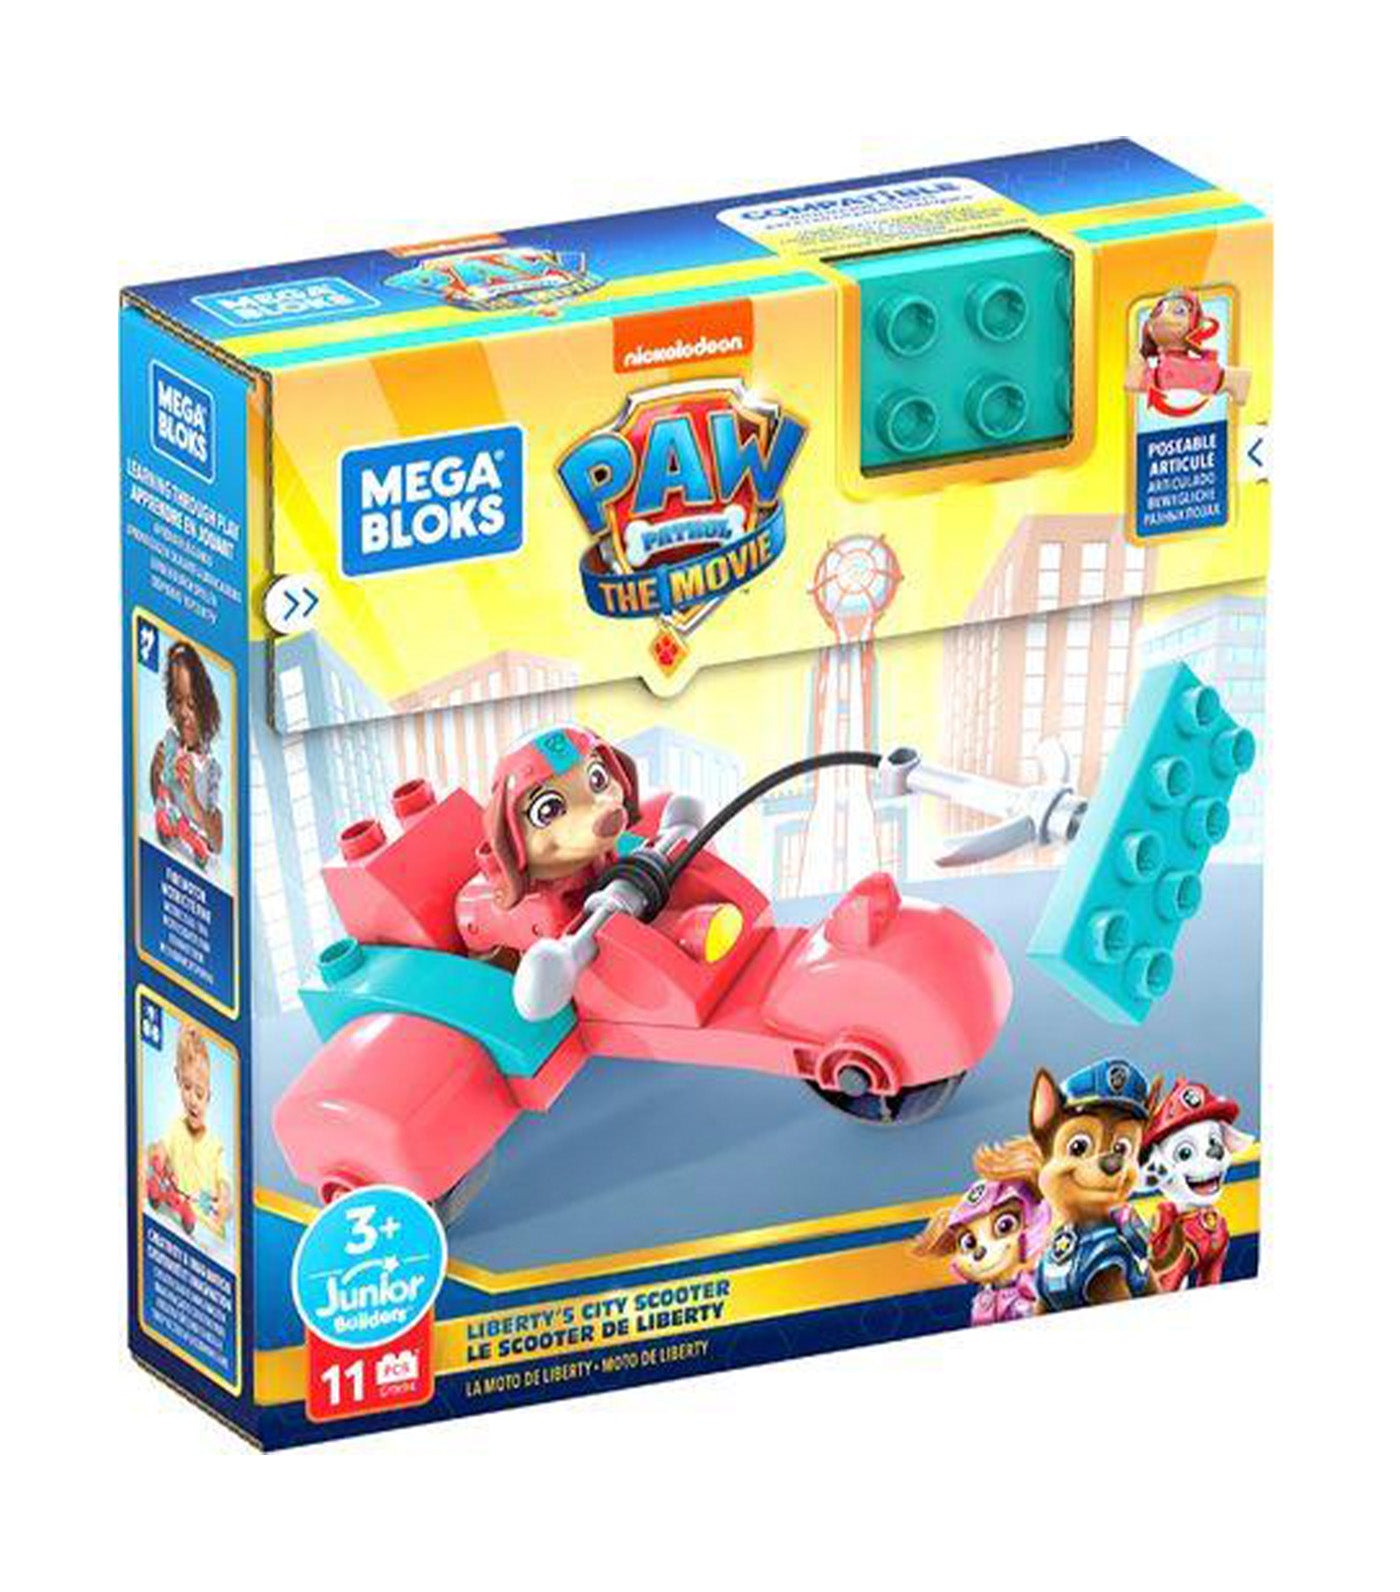 Paw Patrol The Movie Liberty's City Scooter